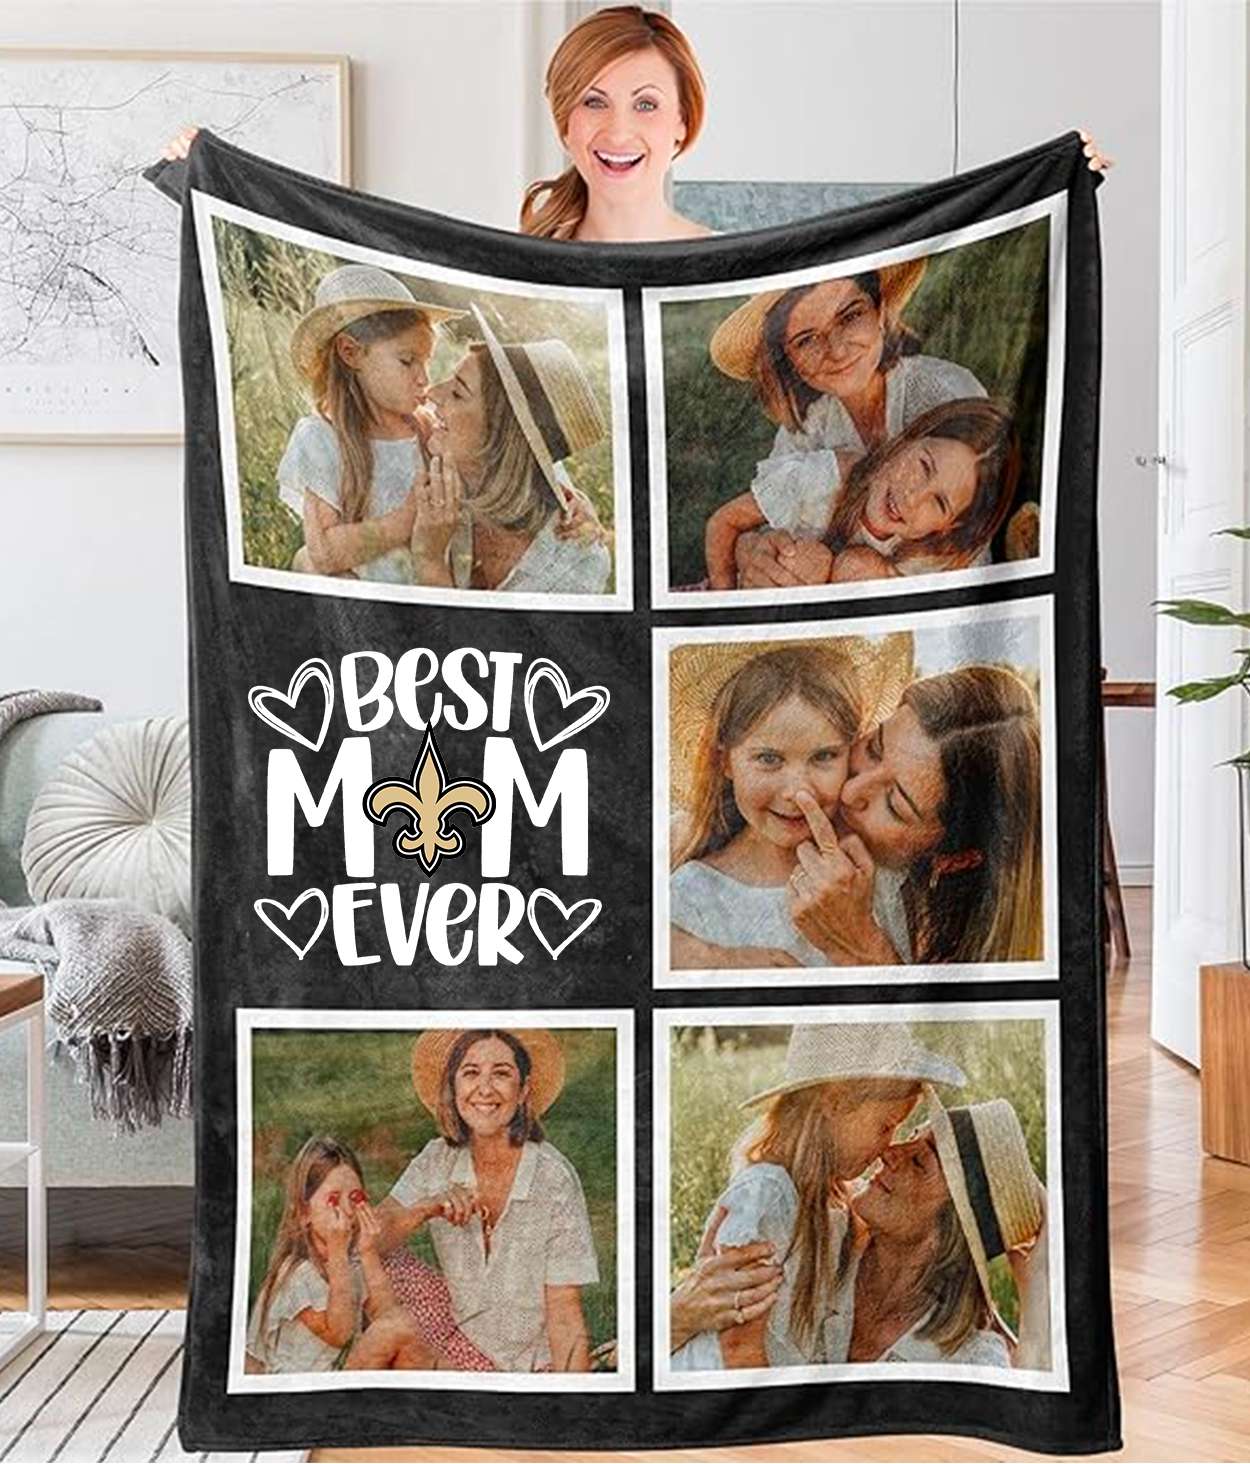 Best Mom Ever - Custom NFL New Orleans Saints Blankets with Pictures for Mother's Day Gift